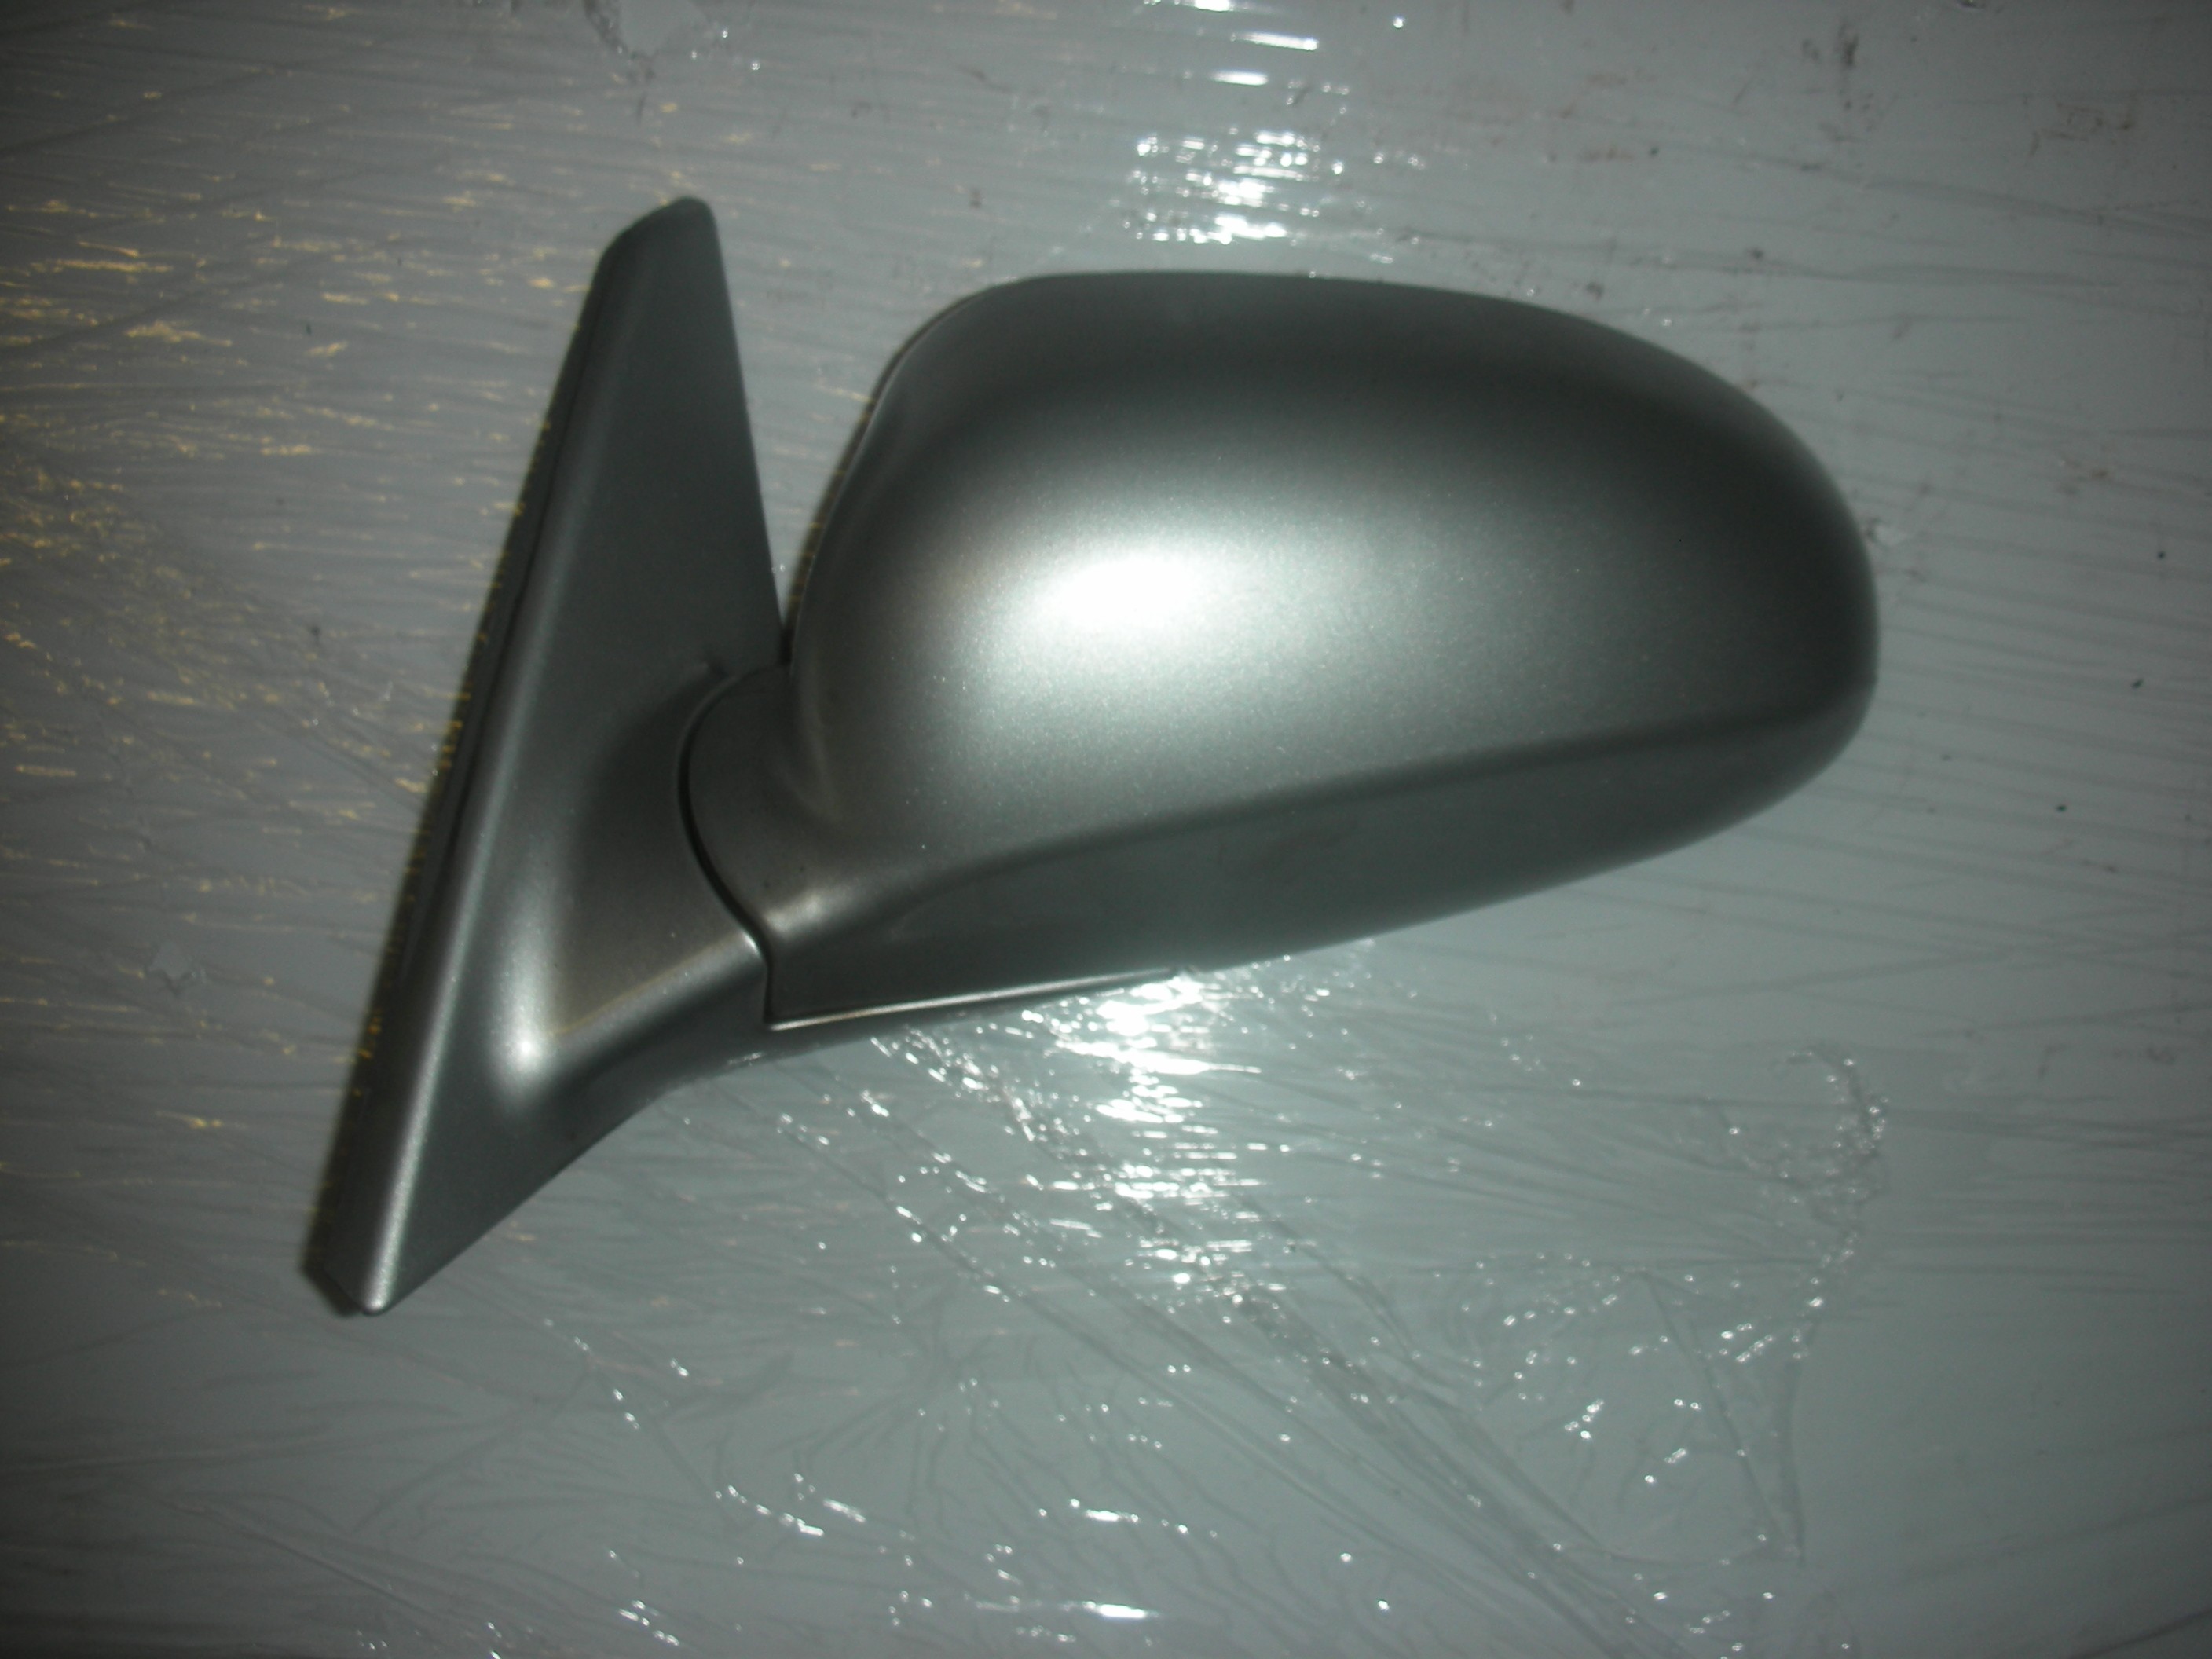 HYUNDAI COUPE PASSENGER SIDE FRONT ELECTRIC DOOR MIRROR 1999-2002.